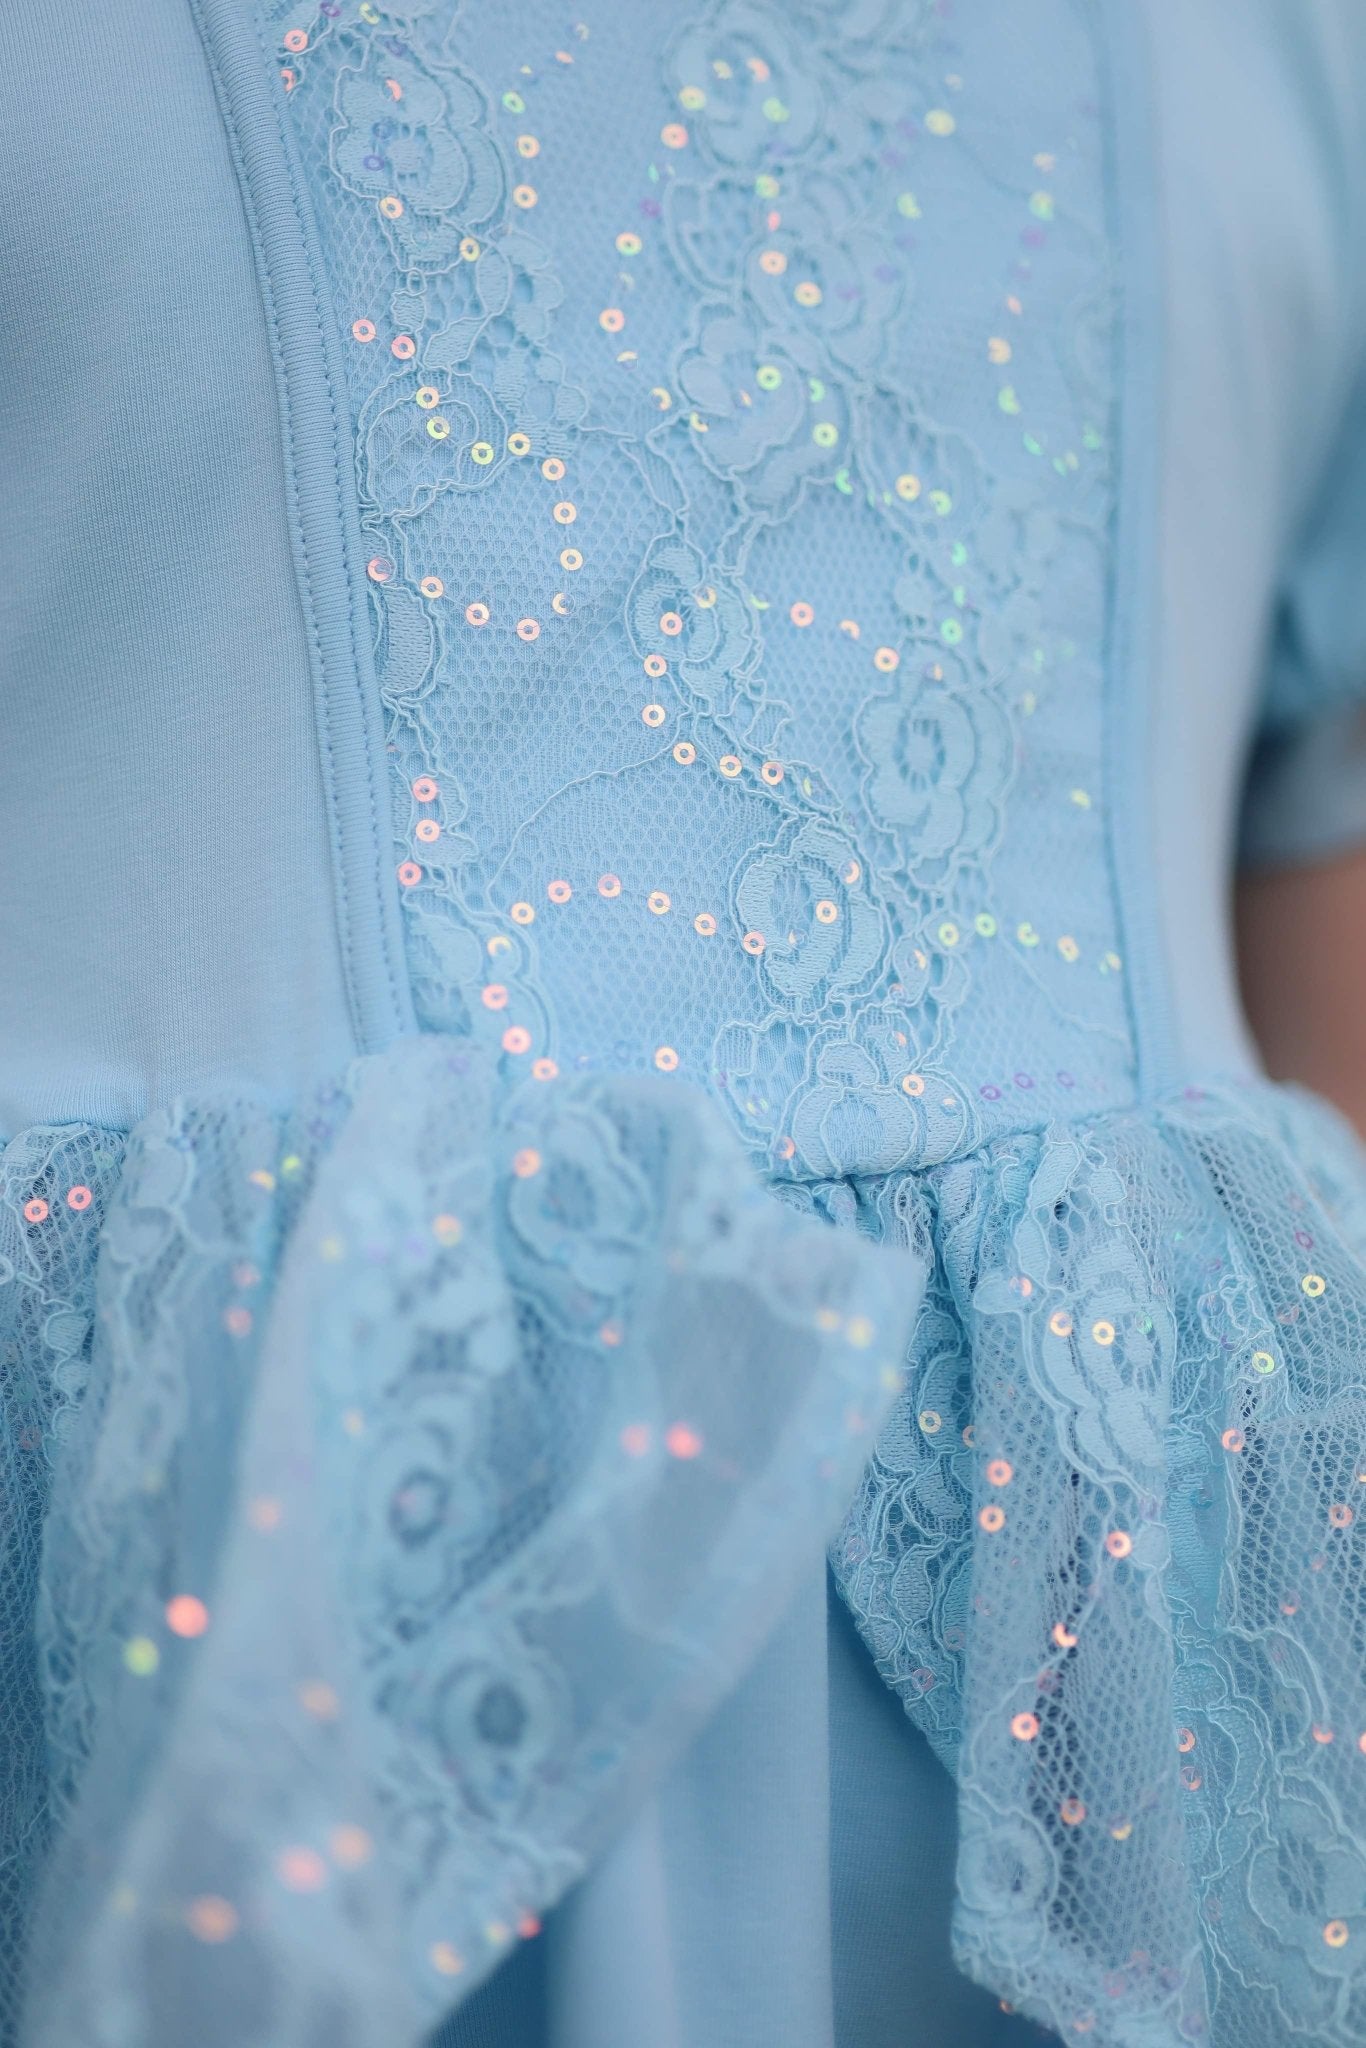 Lost Slipper Baby Blue Sparkle Lace Overlay Tunic Top and Shortie Dreamer - Evie's Closet Clothing